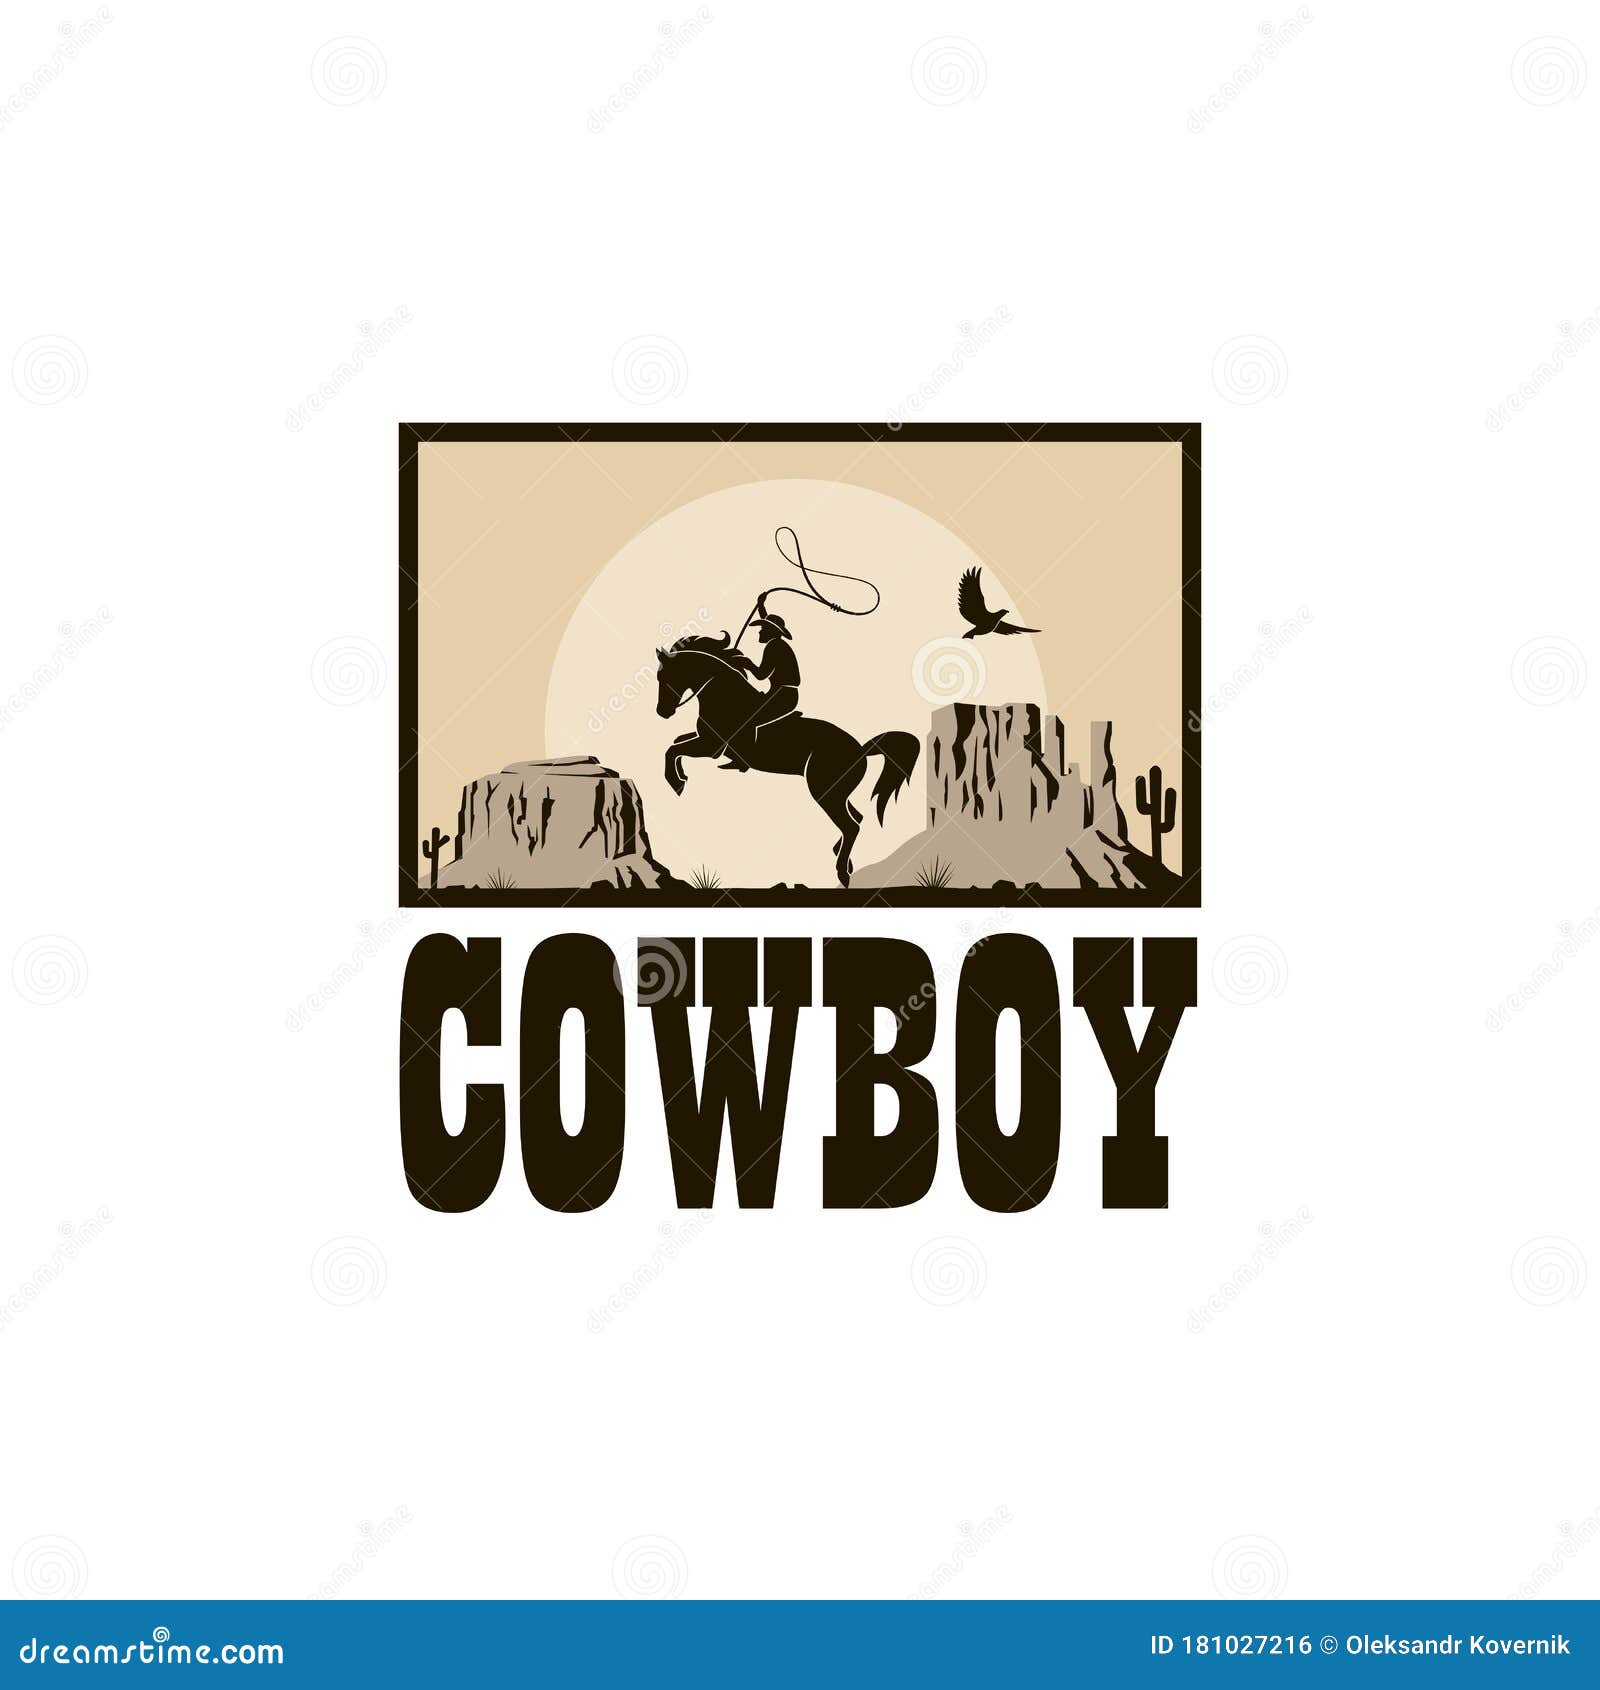 Cowboy Silhouette Illustration Stock Vector - Illustration of mountains ...